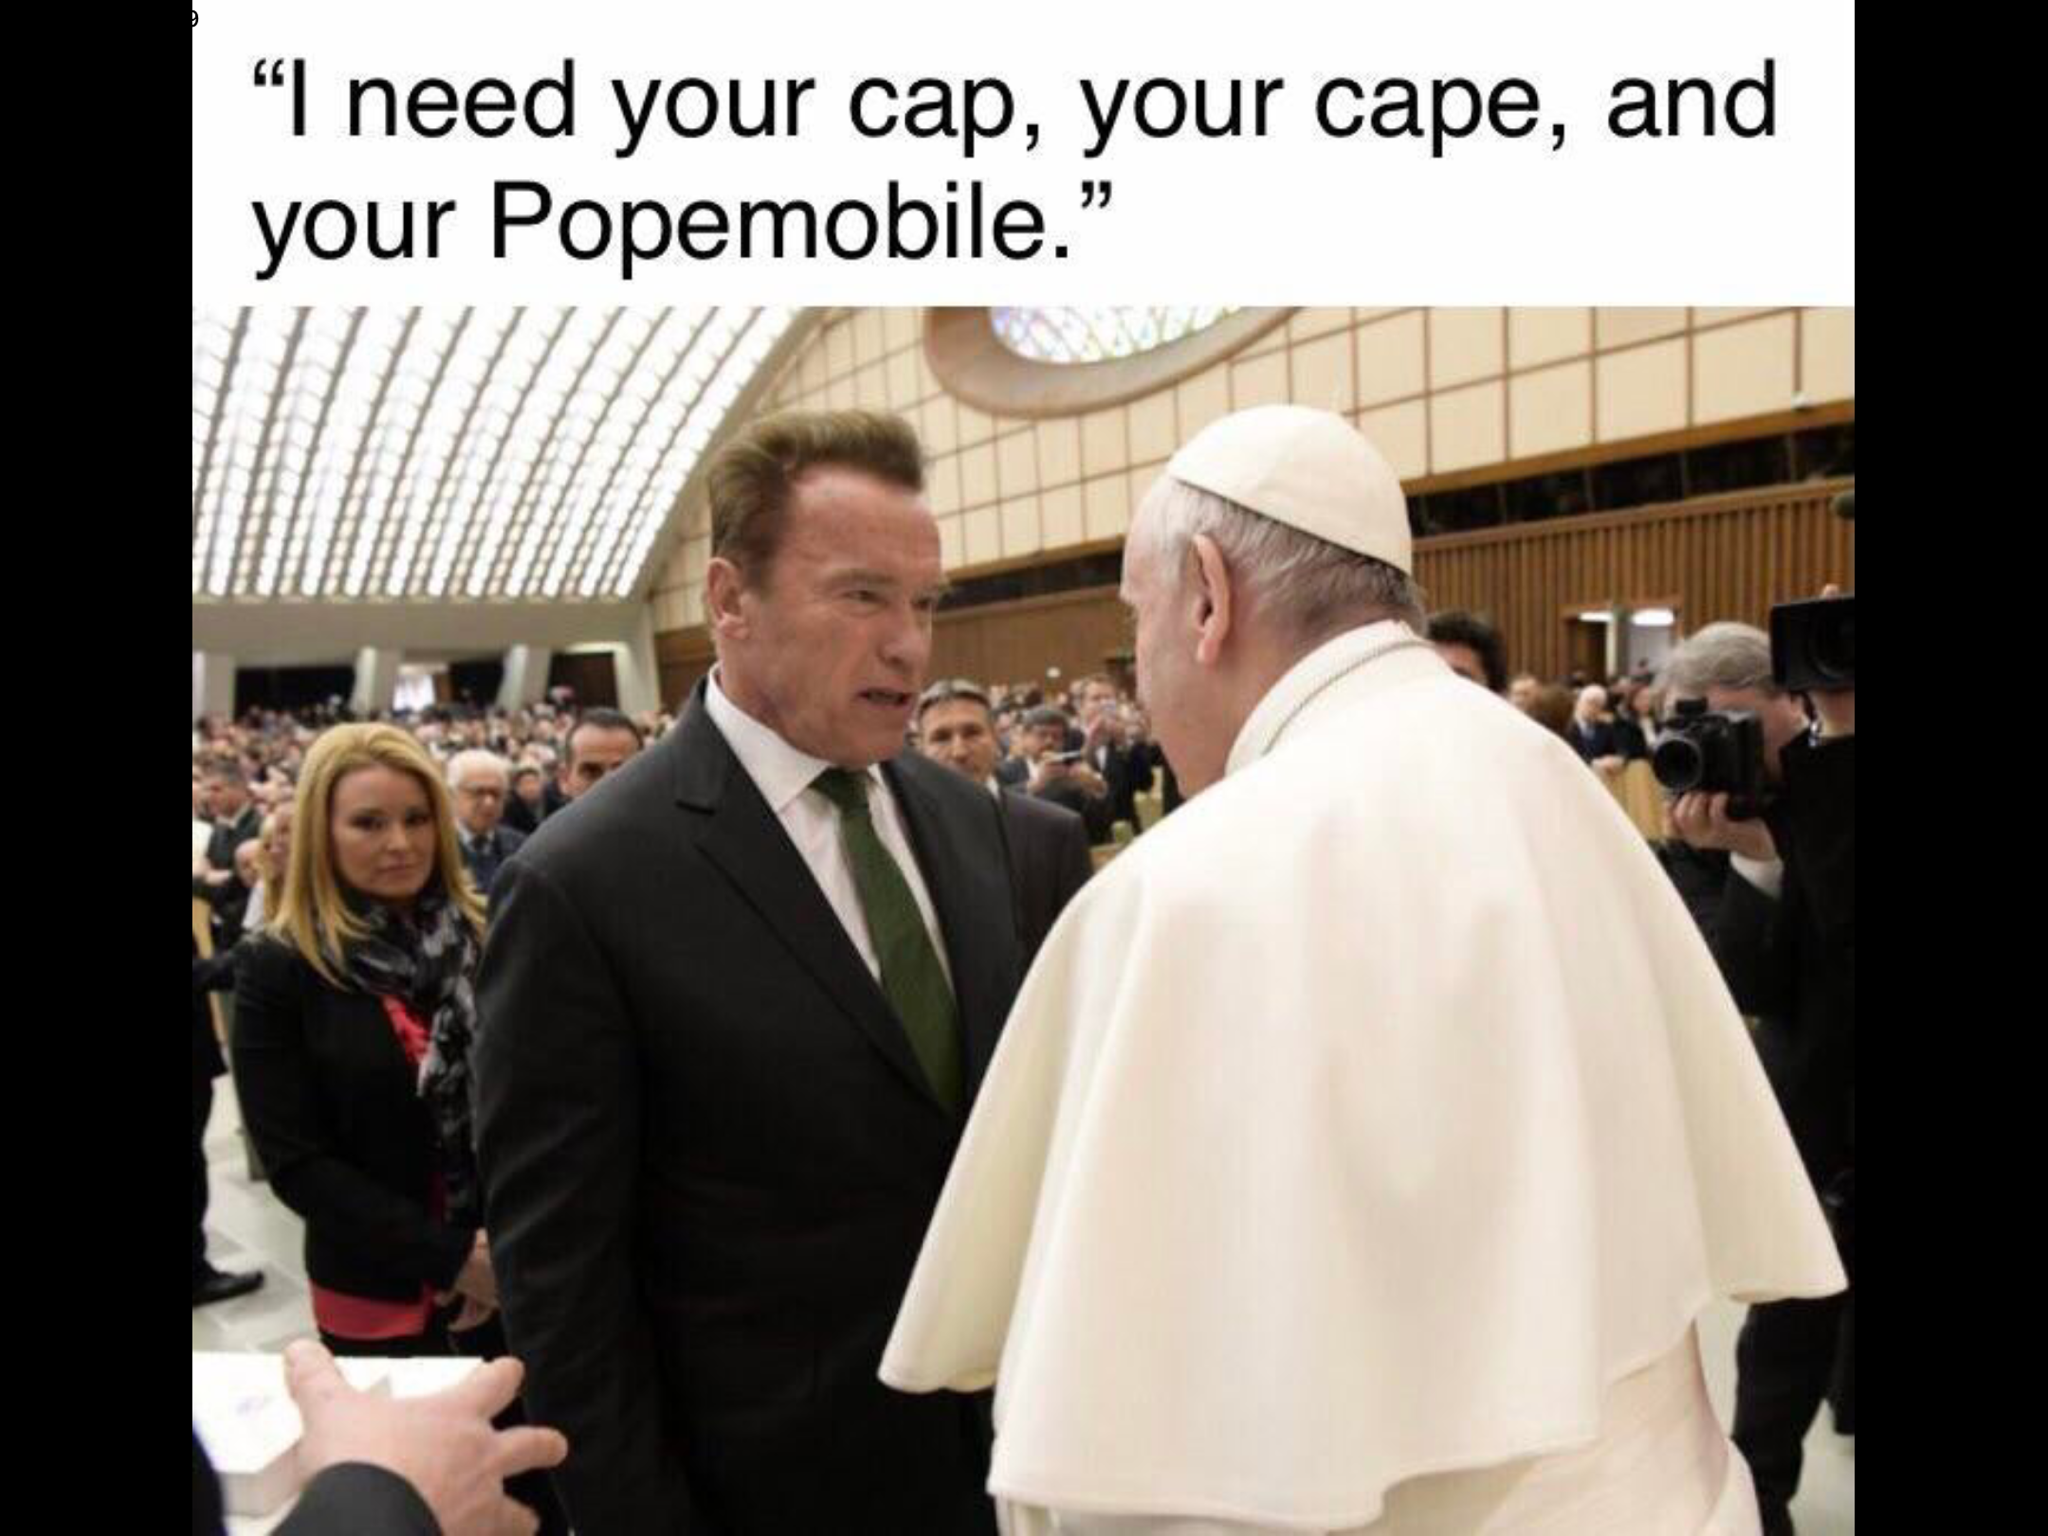 I need your cap, your cape, and your Popemobile."